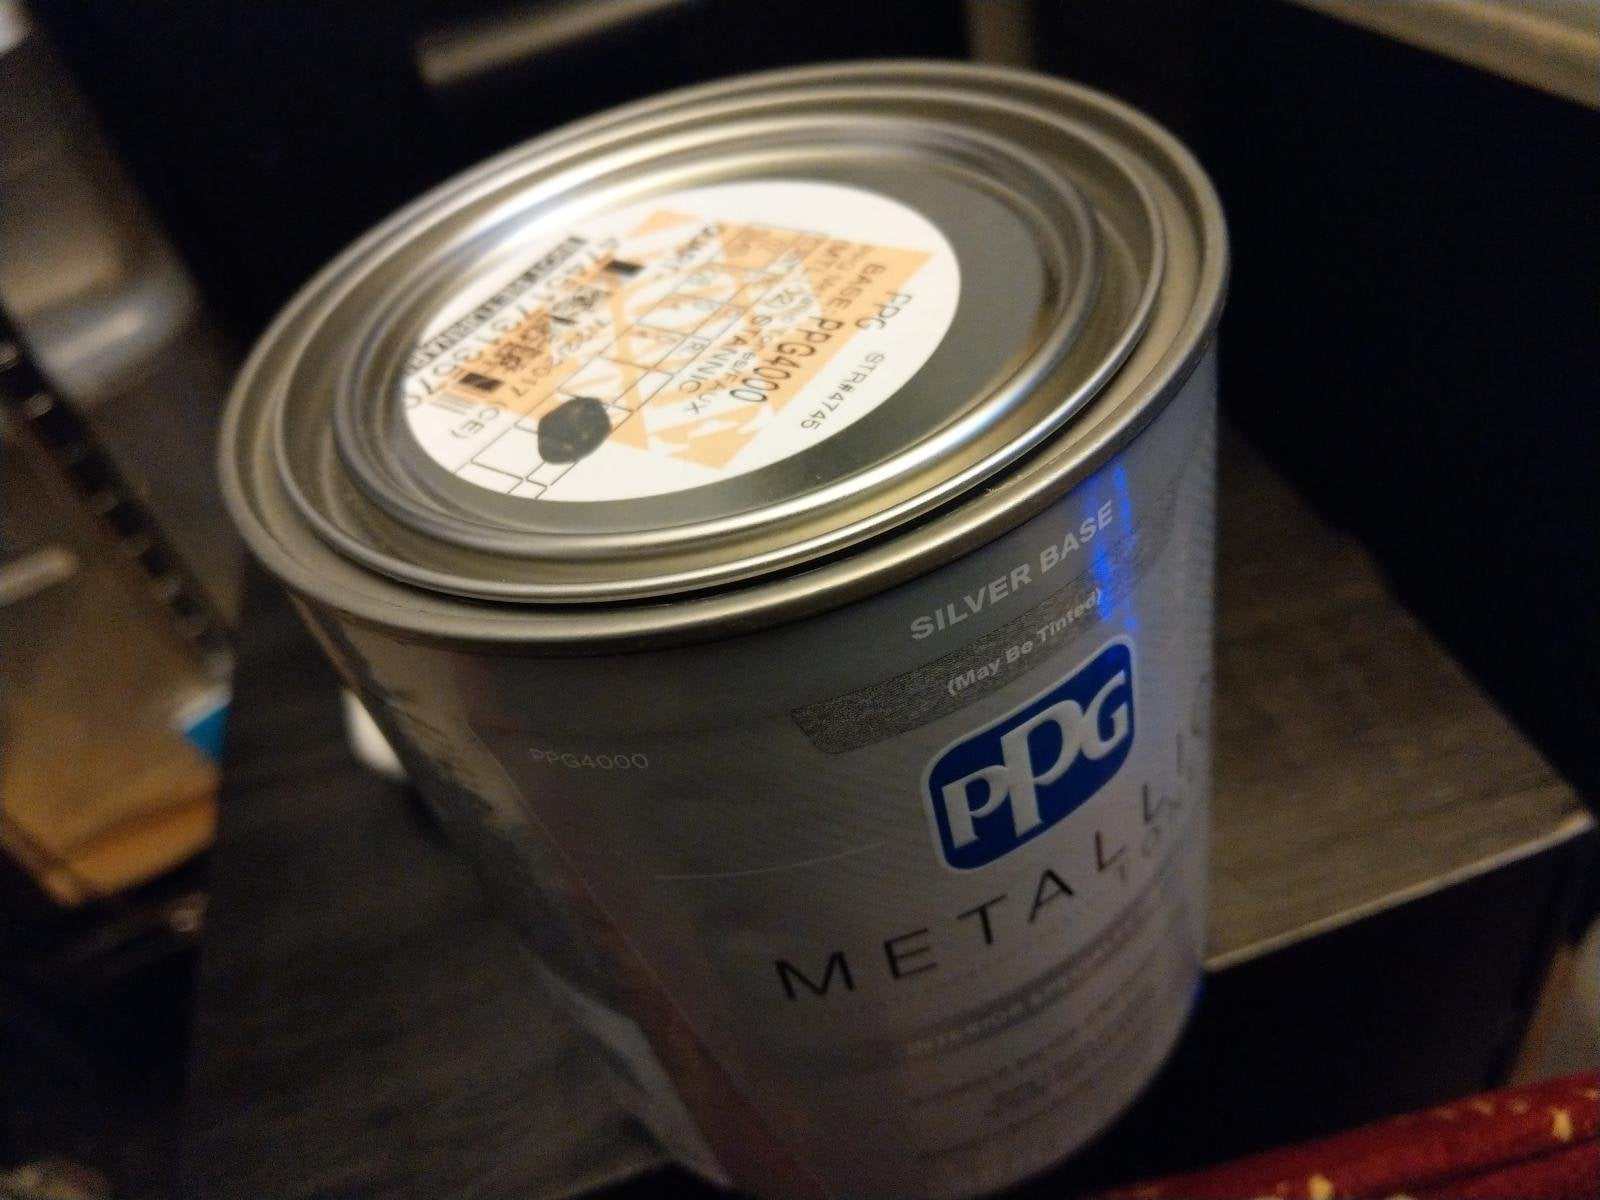 Question on PPG Metallica Silver Paint